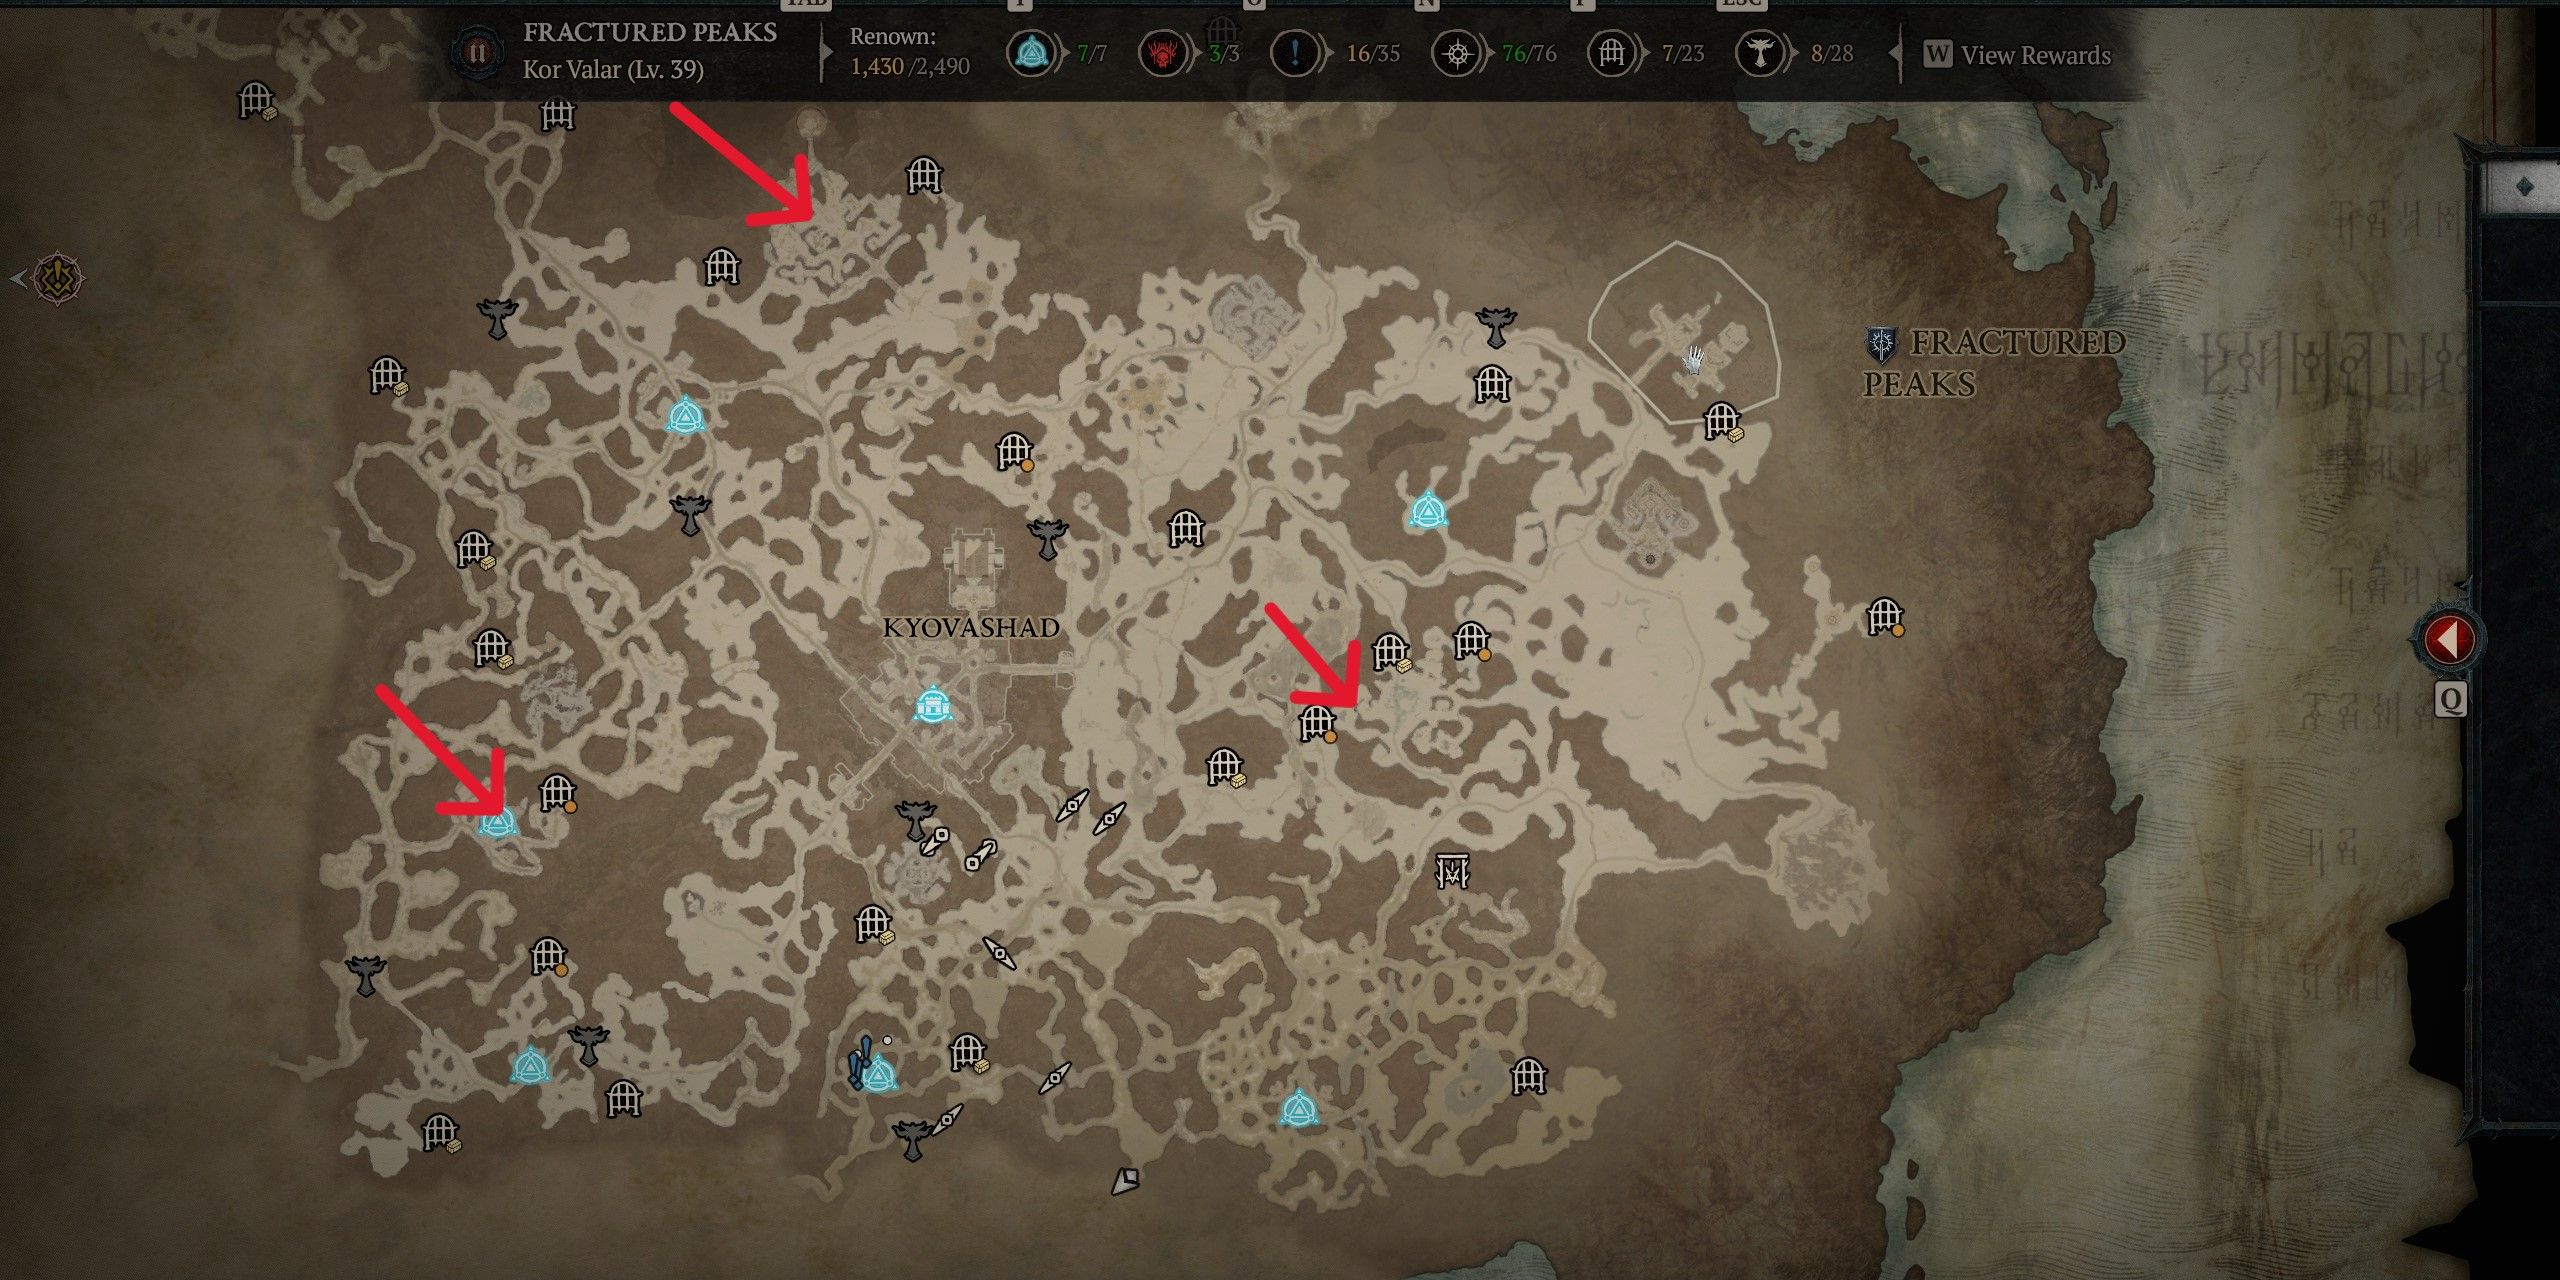 A map of Diablo 4's Fractured Peaks with the stronghold locations marked